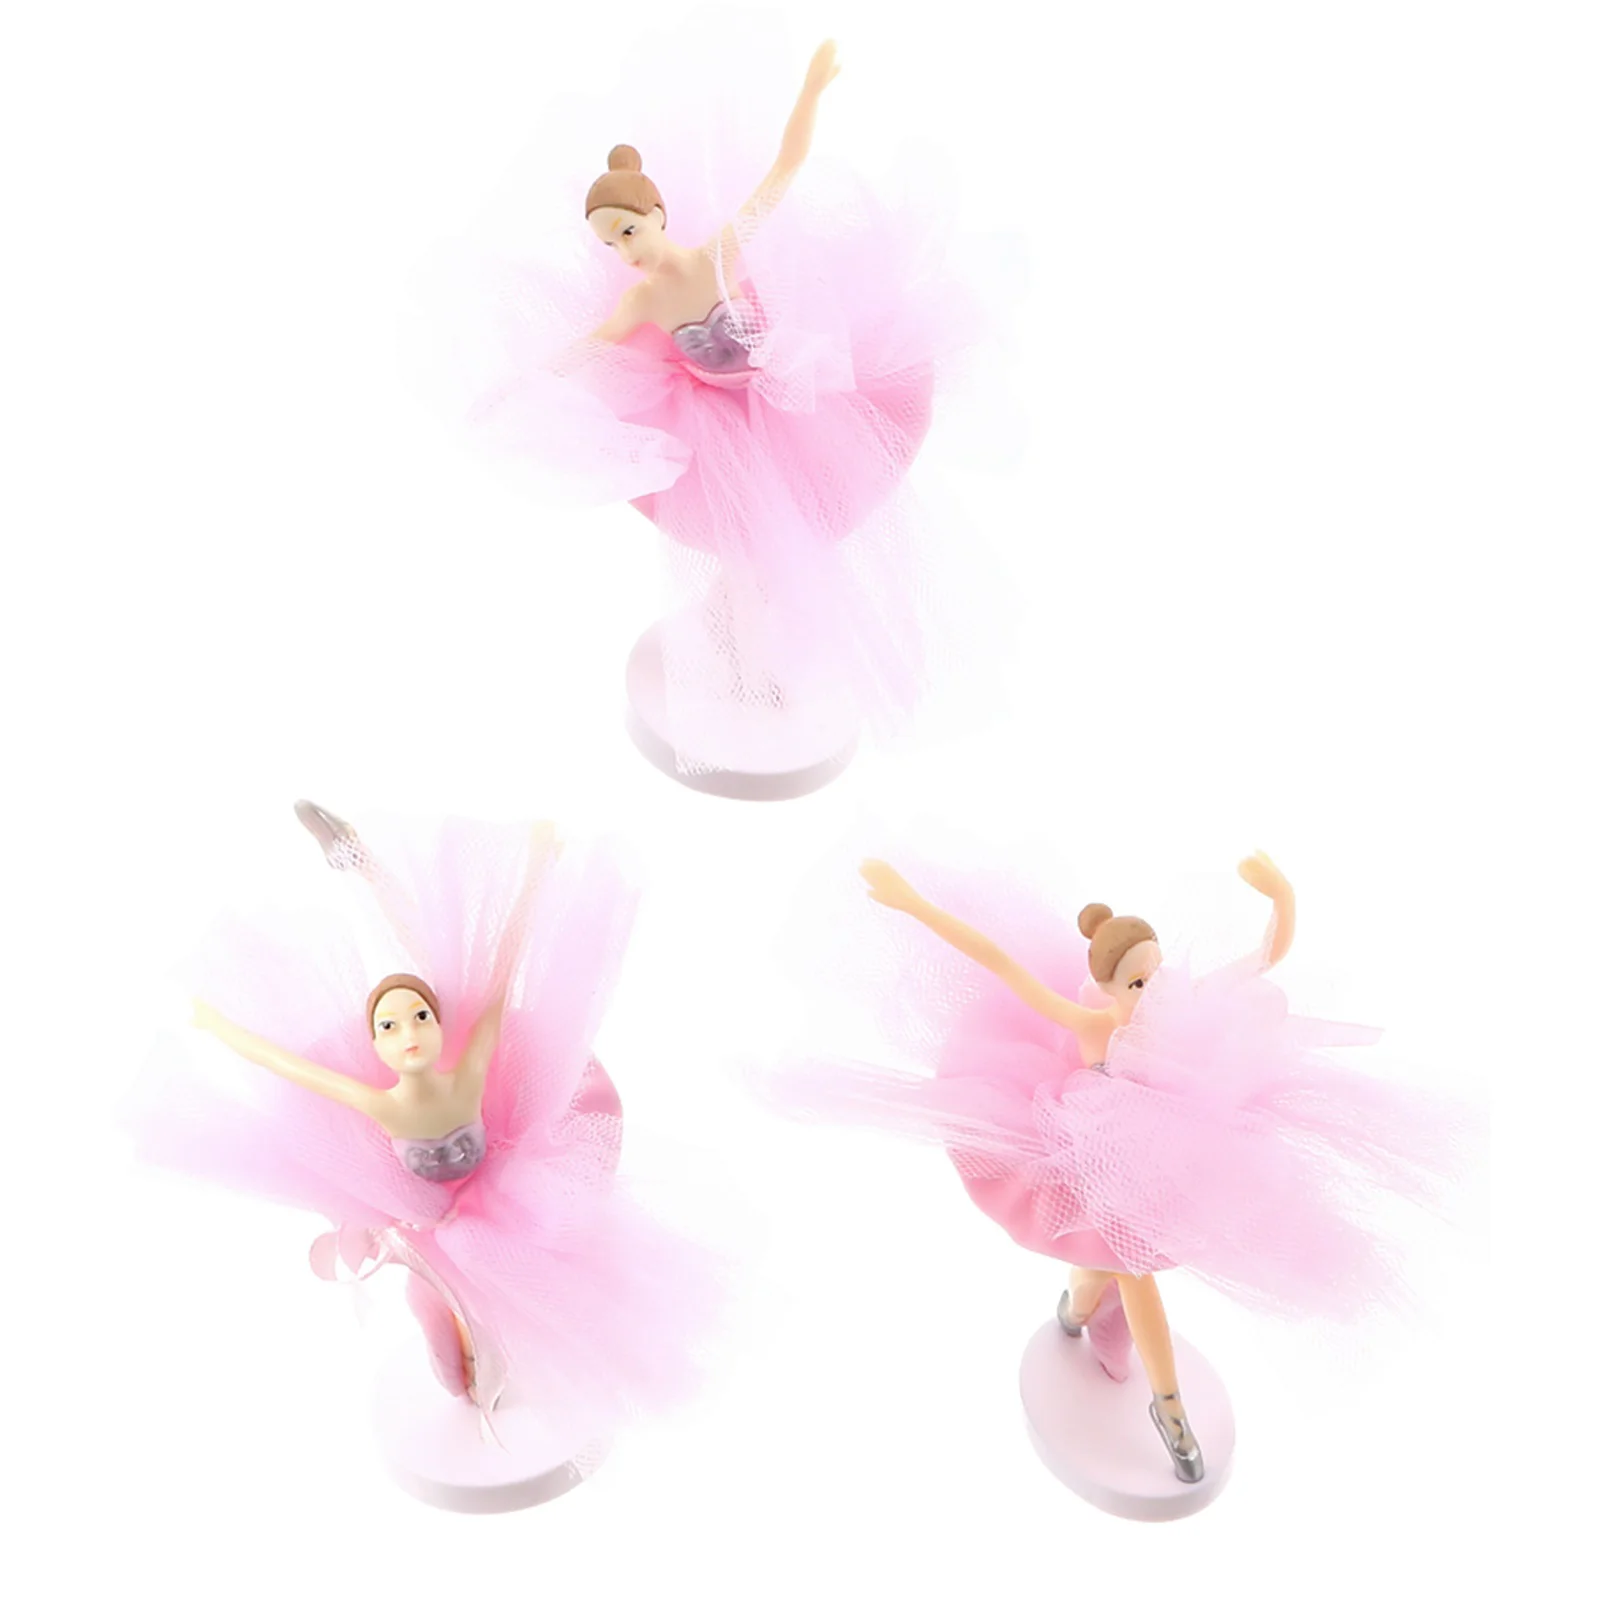 

Ballet Cupcake Figurine Cake Statue Figurines Girl Toppers Sculpture Topper Ornaments Dancer Decor Dancing Party Decorations